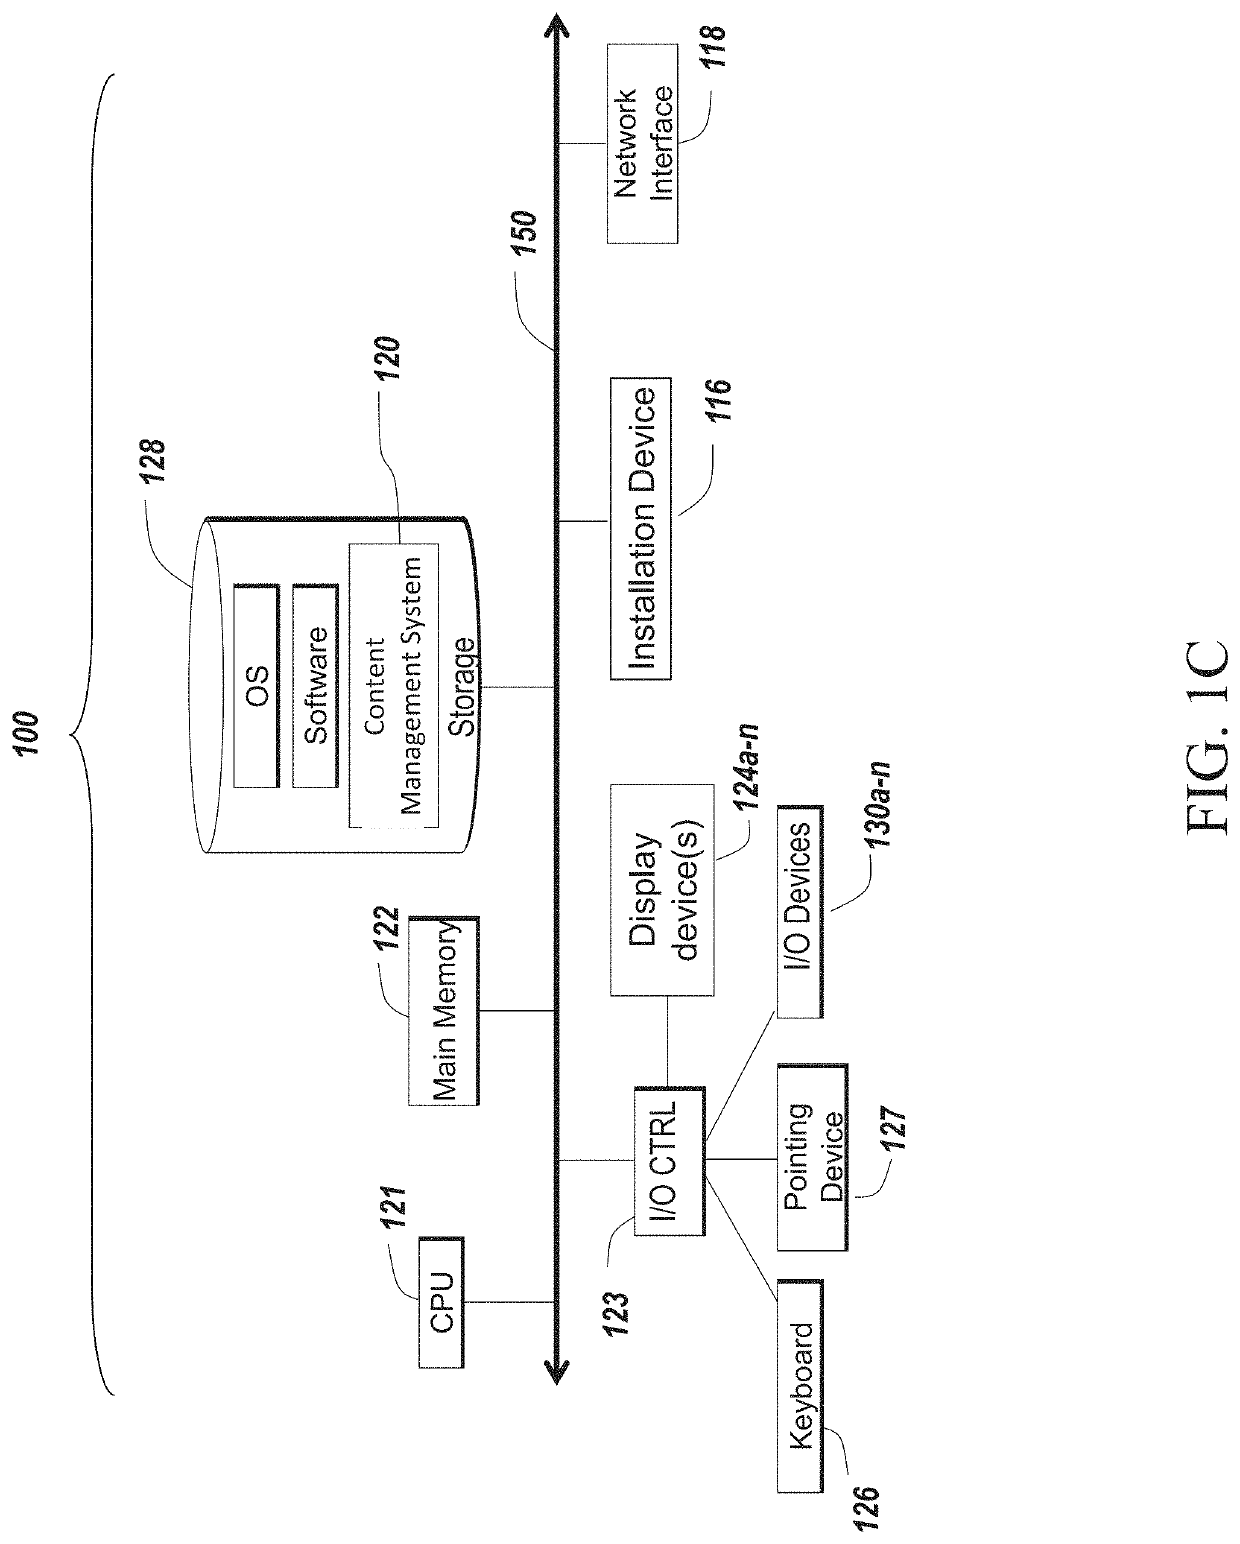 System and methods for prioritizing content packets based on a dynamically updated list of profile attributes